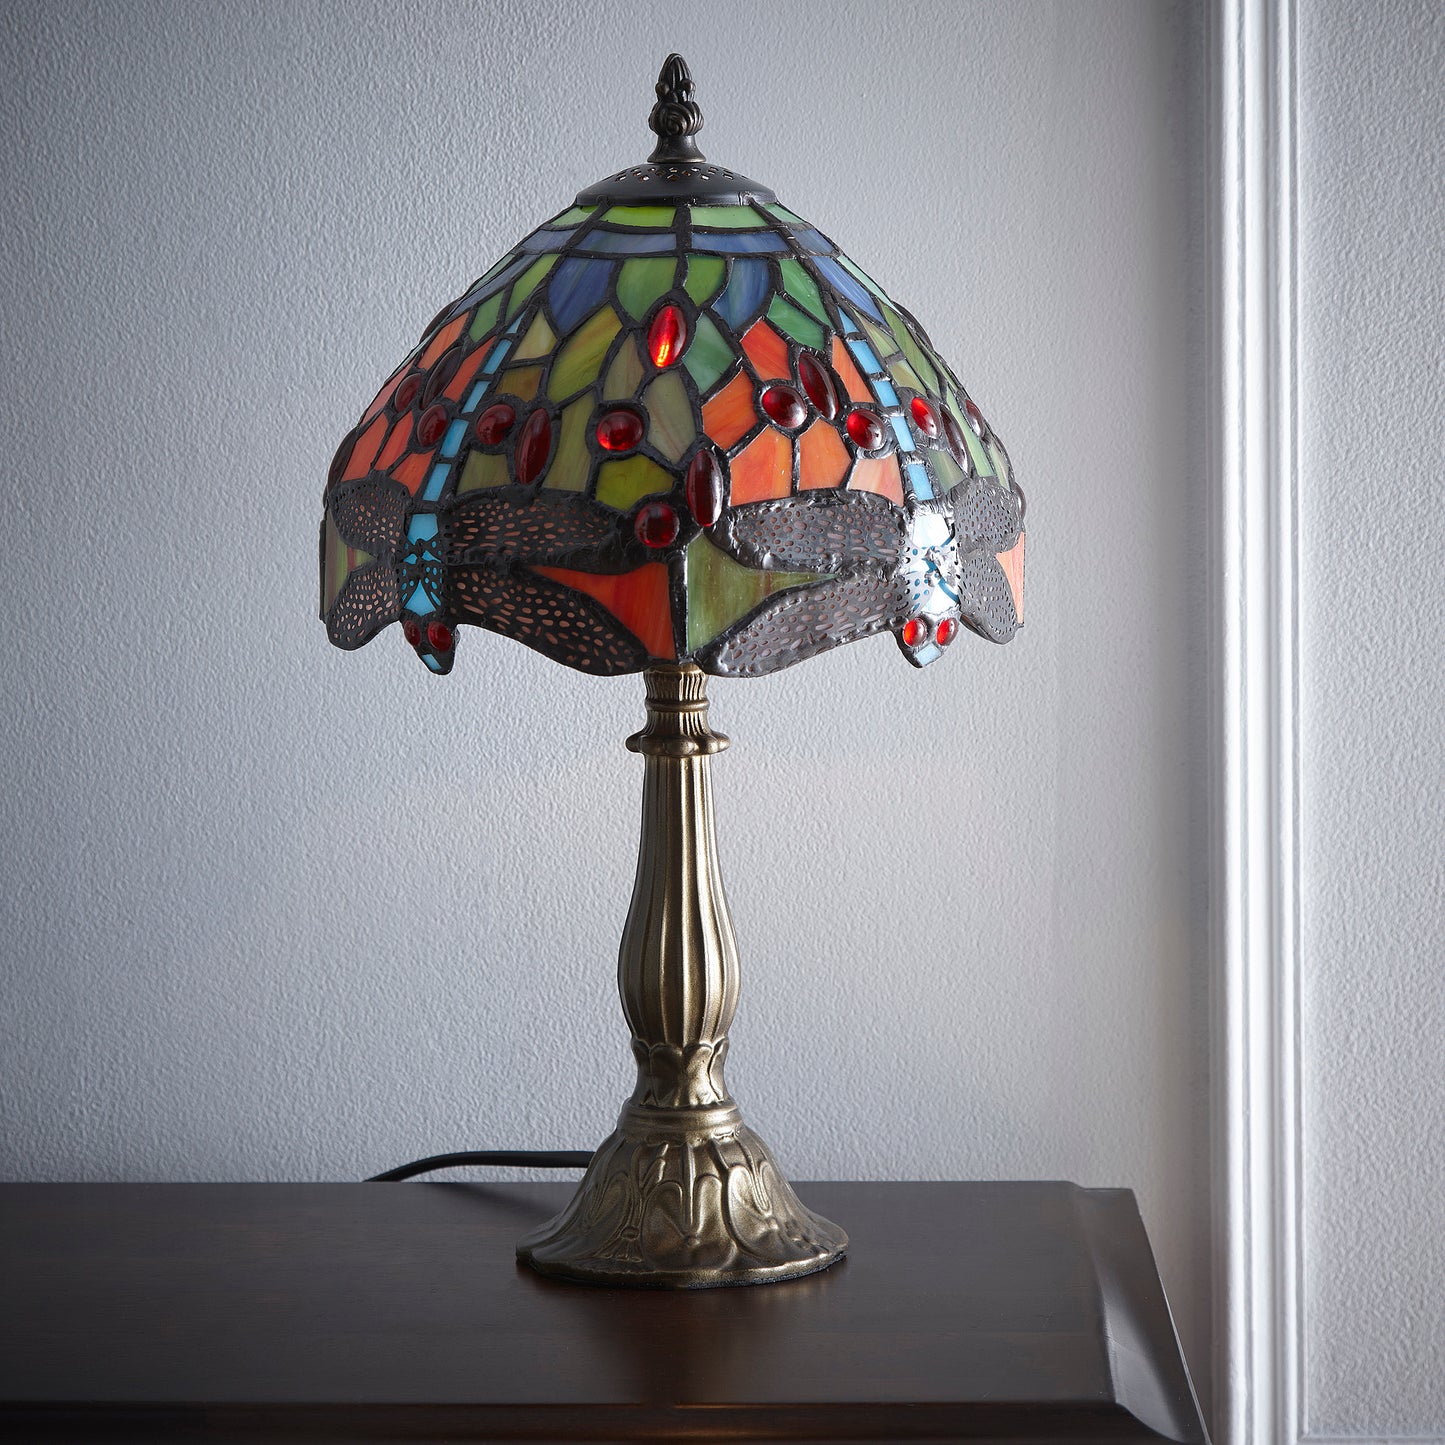 Mitcham Tiffany Style 8 inch Table Lamp with a Dragon Fly Pattern design